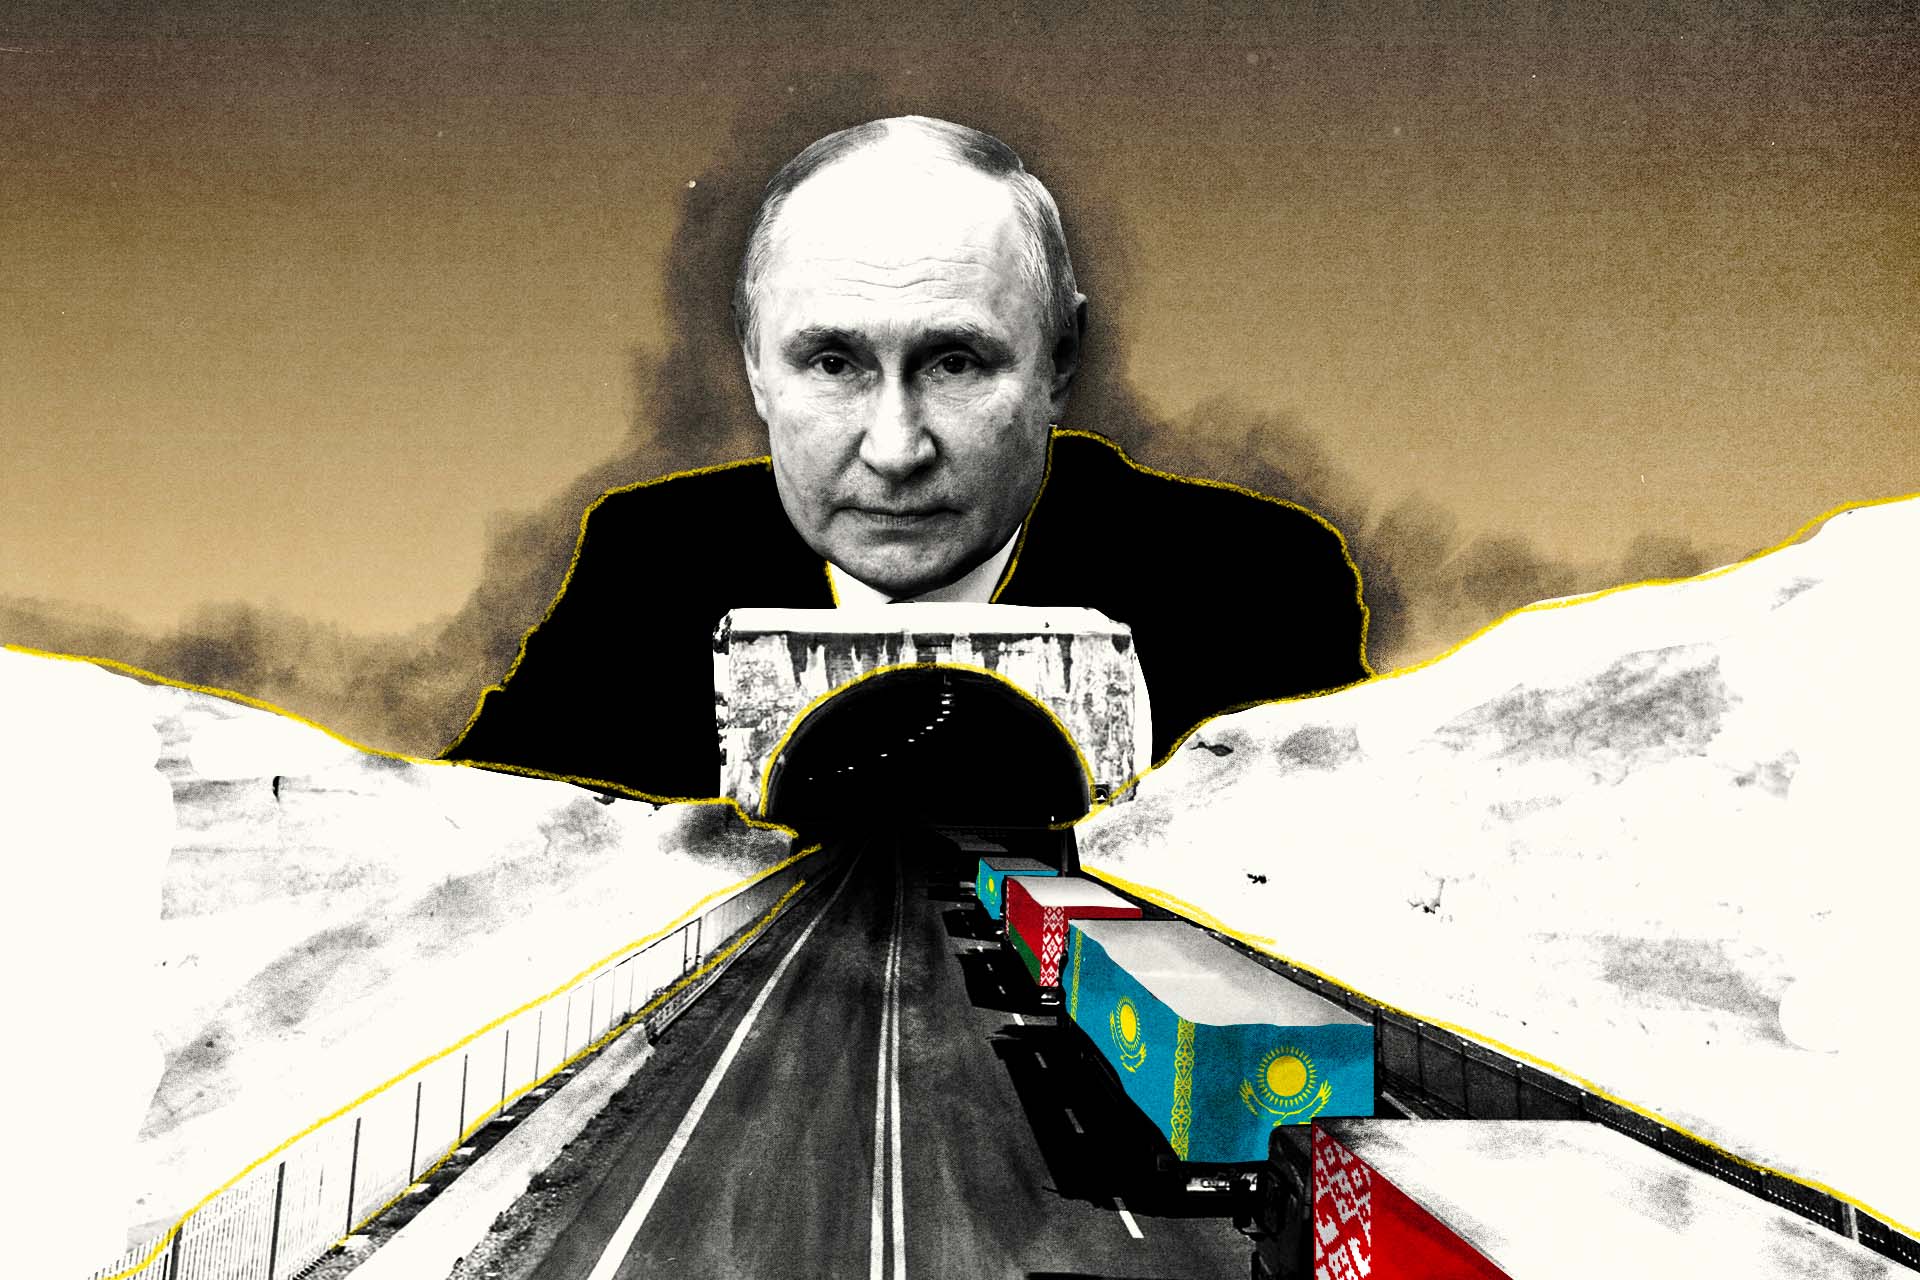 In 'False Transit' Loophole, Russia’s War Machine Is Supplied Through Kazakh Companies and Belarusian Warehouses